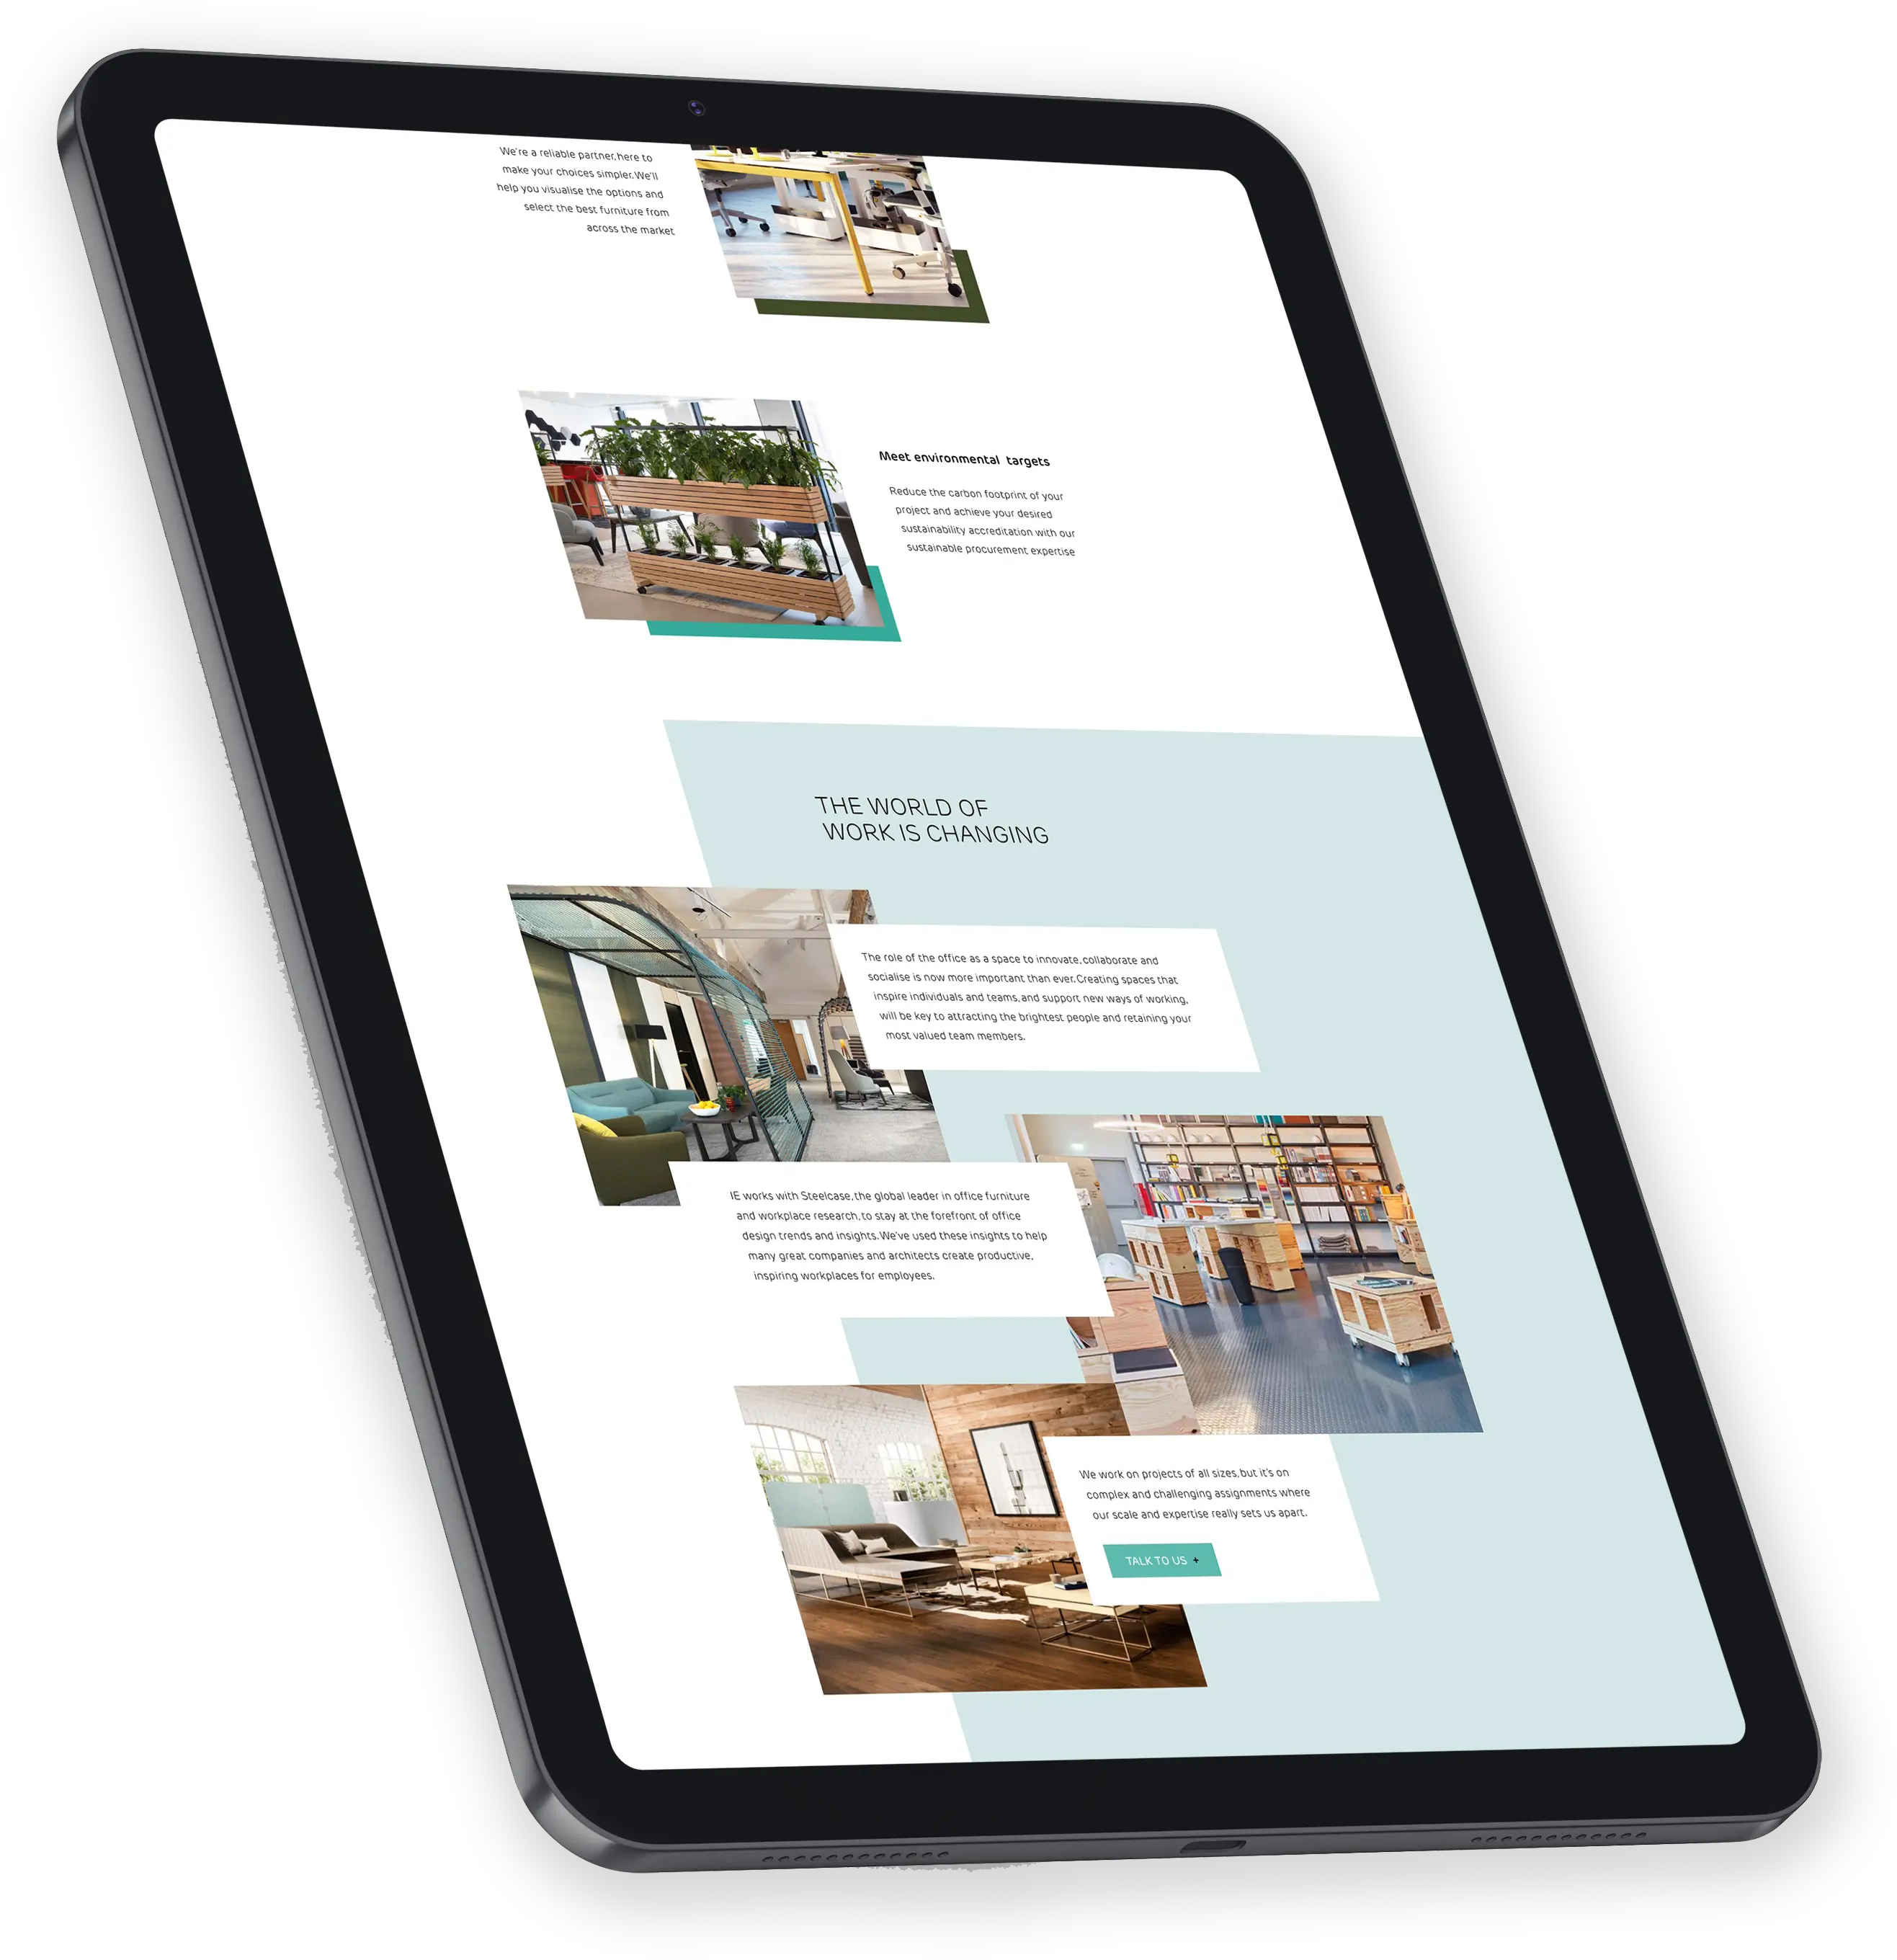 ipad-air-mock-up-of-ie-website-design-by-equinet